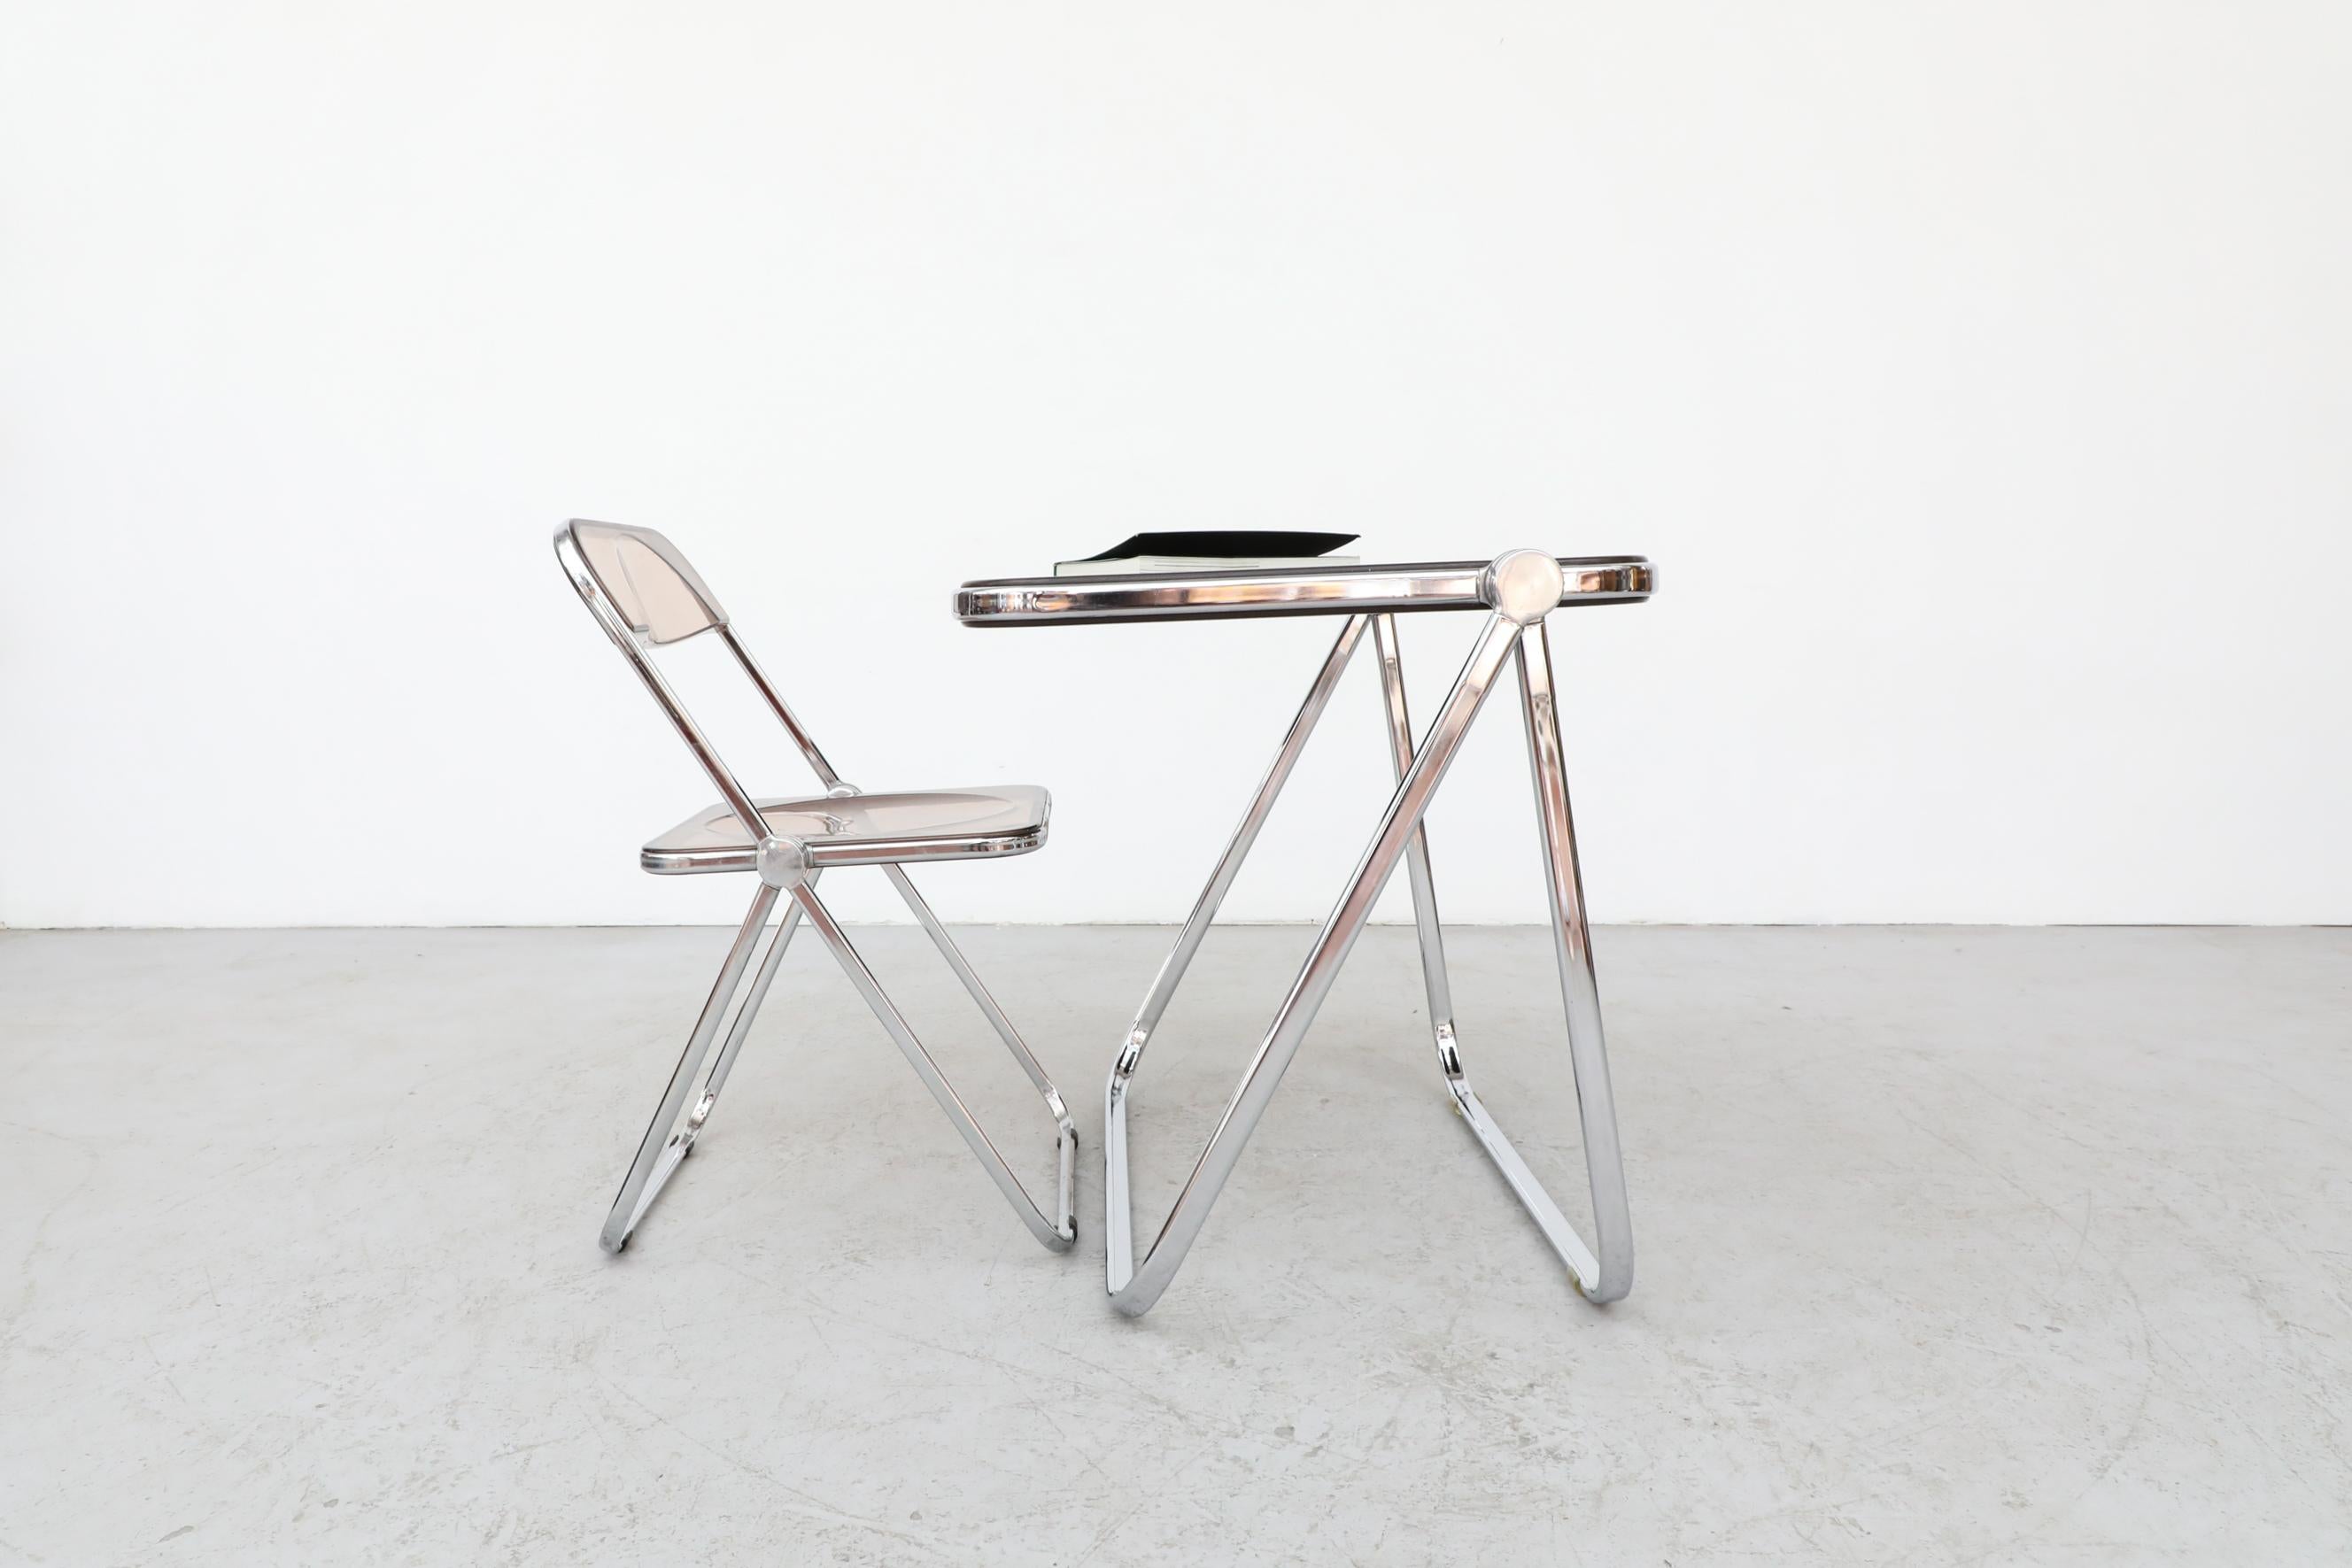 Platone folding table, designed by Giancarlo Piretti for Castelli,1970. Chrome plated tubular steel frame with die-cast aluminium alloy joints and molded polyurethane top. In good original condition with visible wear including visible scratching to